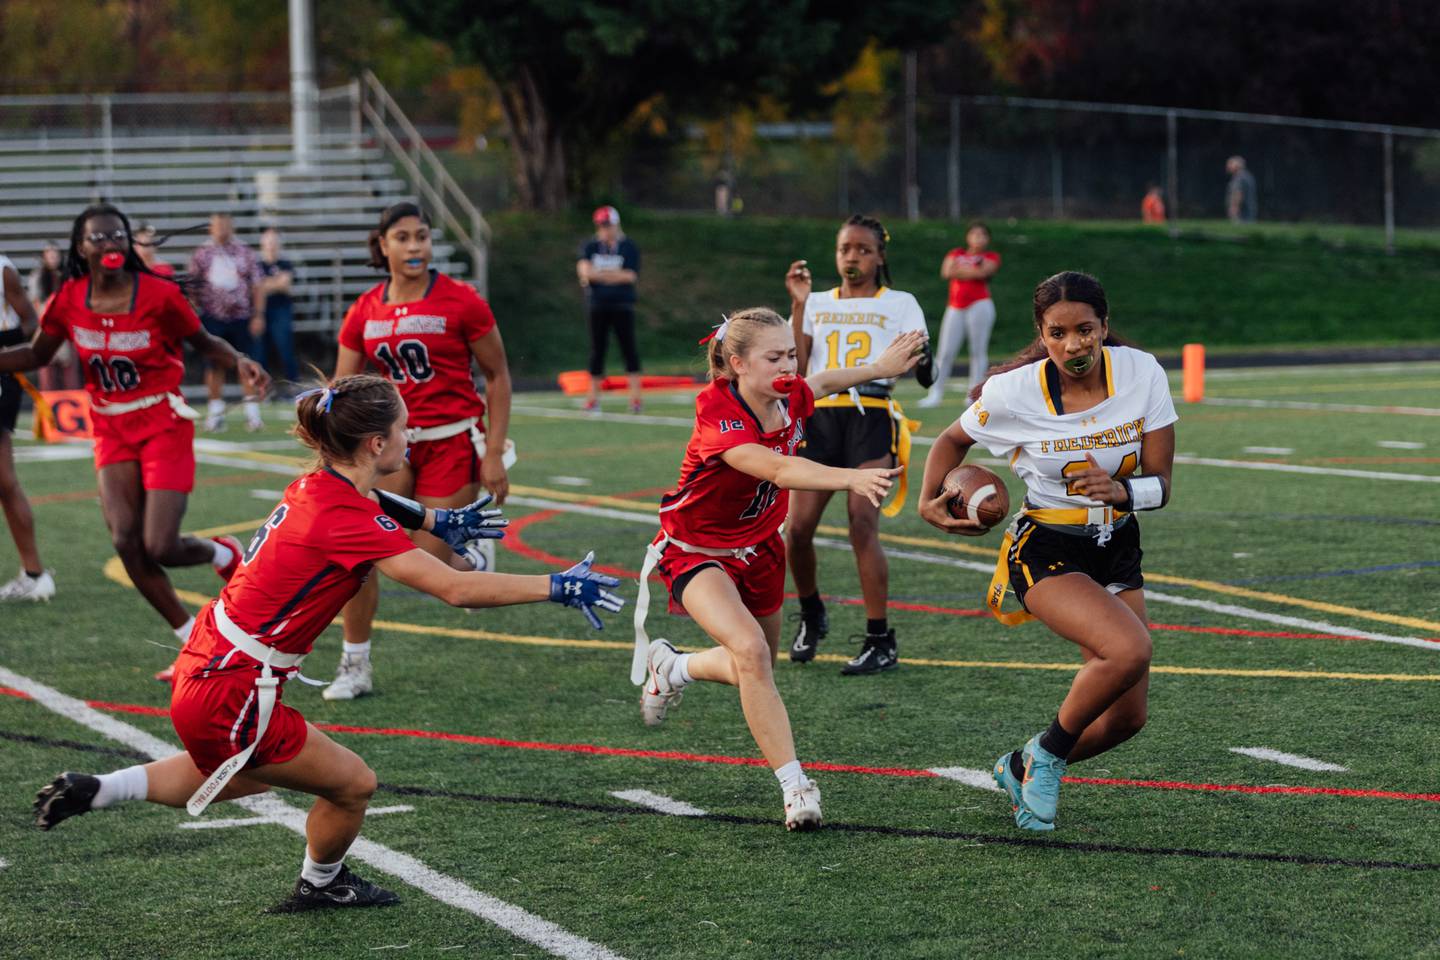 Frederick County Cadets freshman Maya Robinson runs the ball against the Thomas Johnson Patriots during the final minutes of regular season play in the girls varsity flag football season at Thomas Johnson High School, on Thursday, Oct. 26, 2023 in Frederick, MD. (Wesley Lapointe / for the Baltimore Banner)